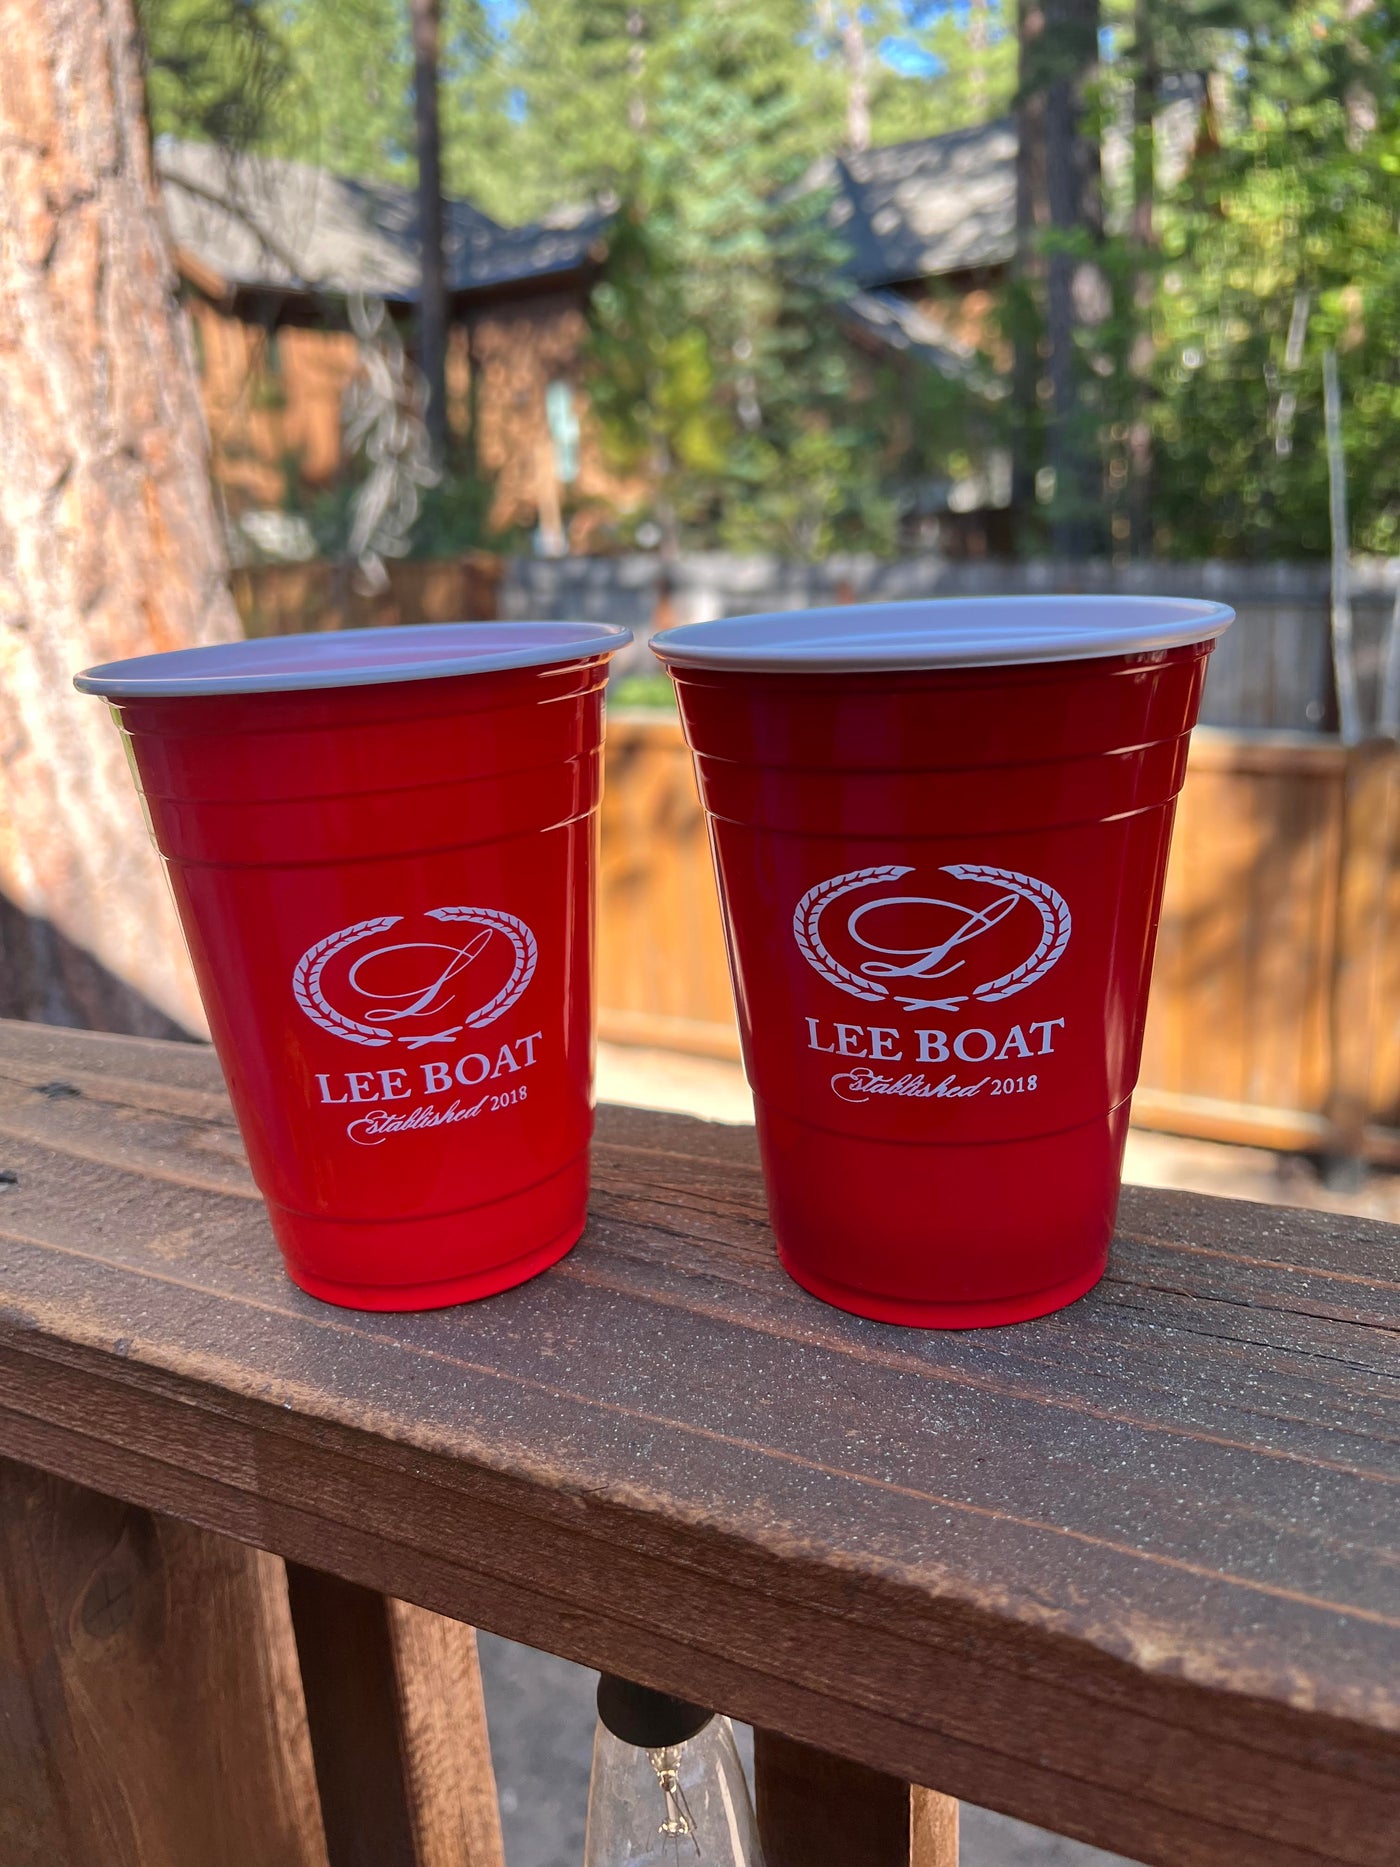 Plastic Cups, Disposable Cups, Clear Plastic Cups, Soft Sided Cups,  Personalized Plastic Cups, Custom Plastic Cups, 16 oz Soft Plastic Cups